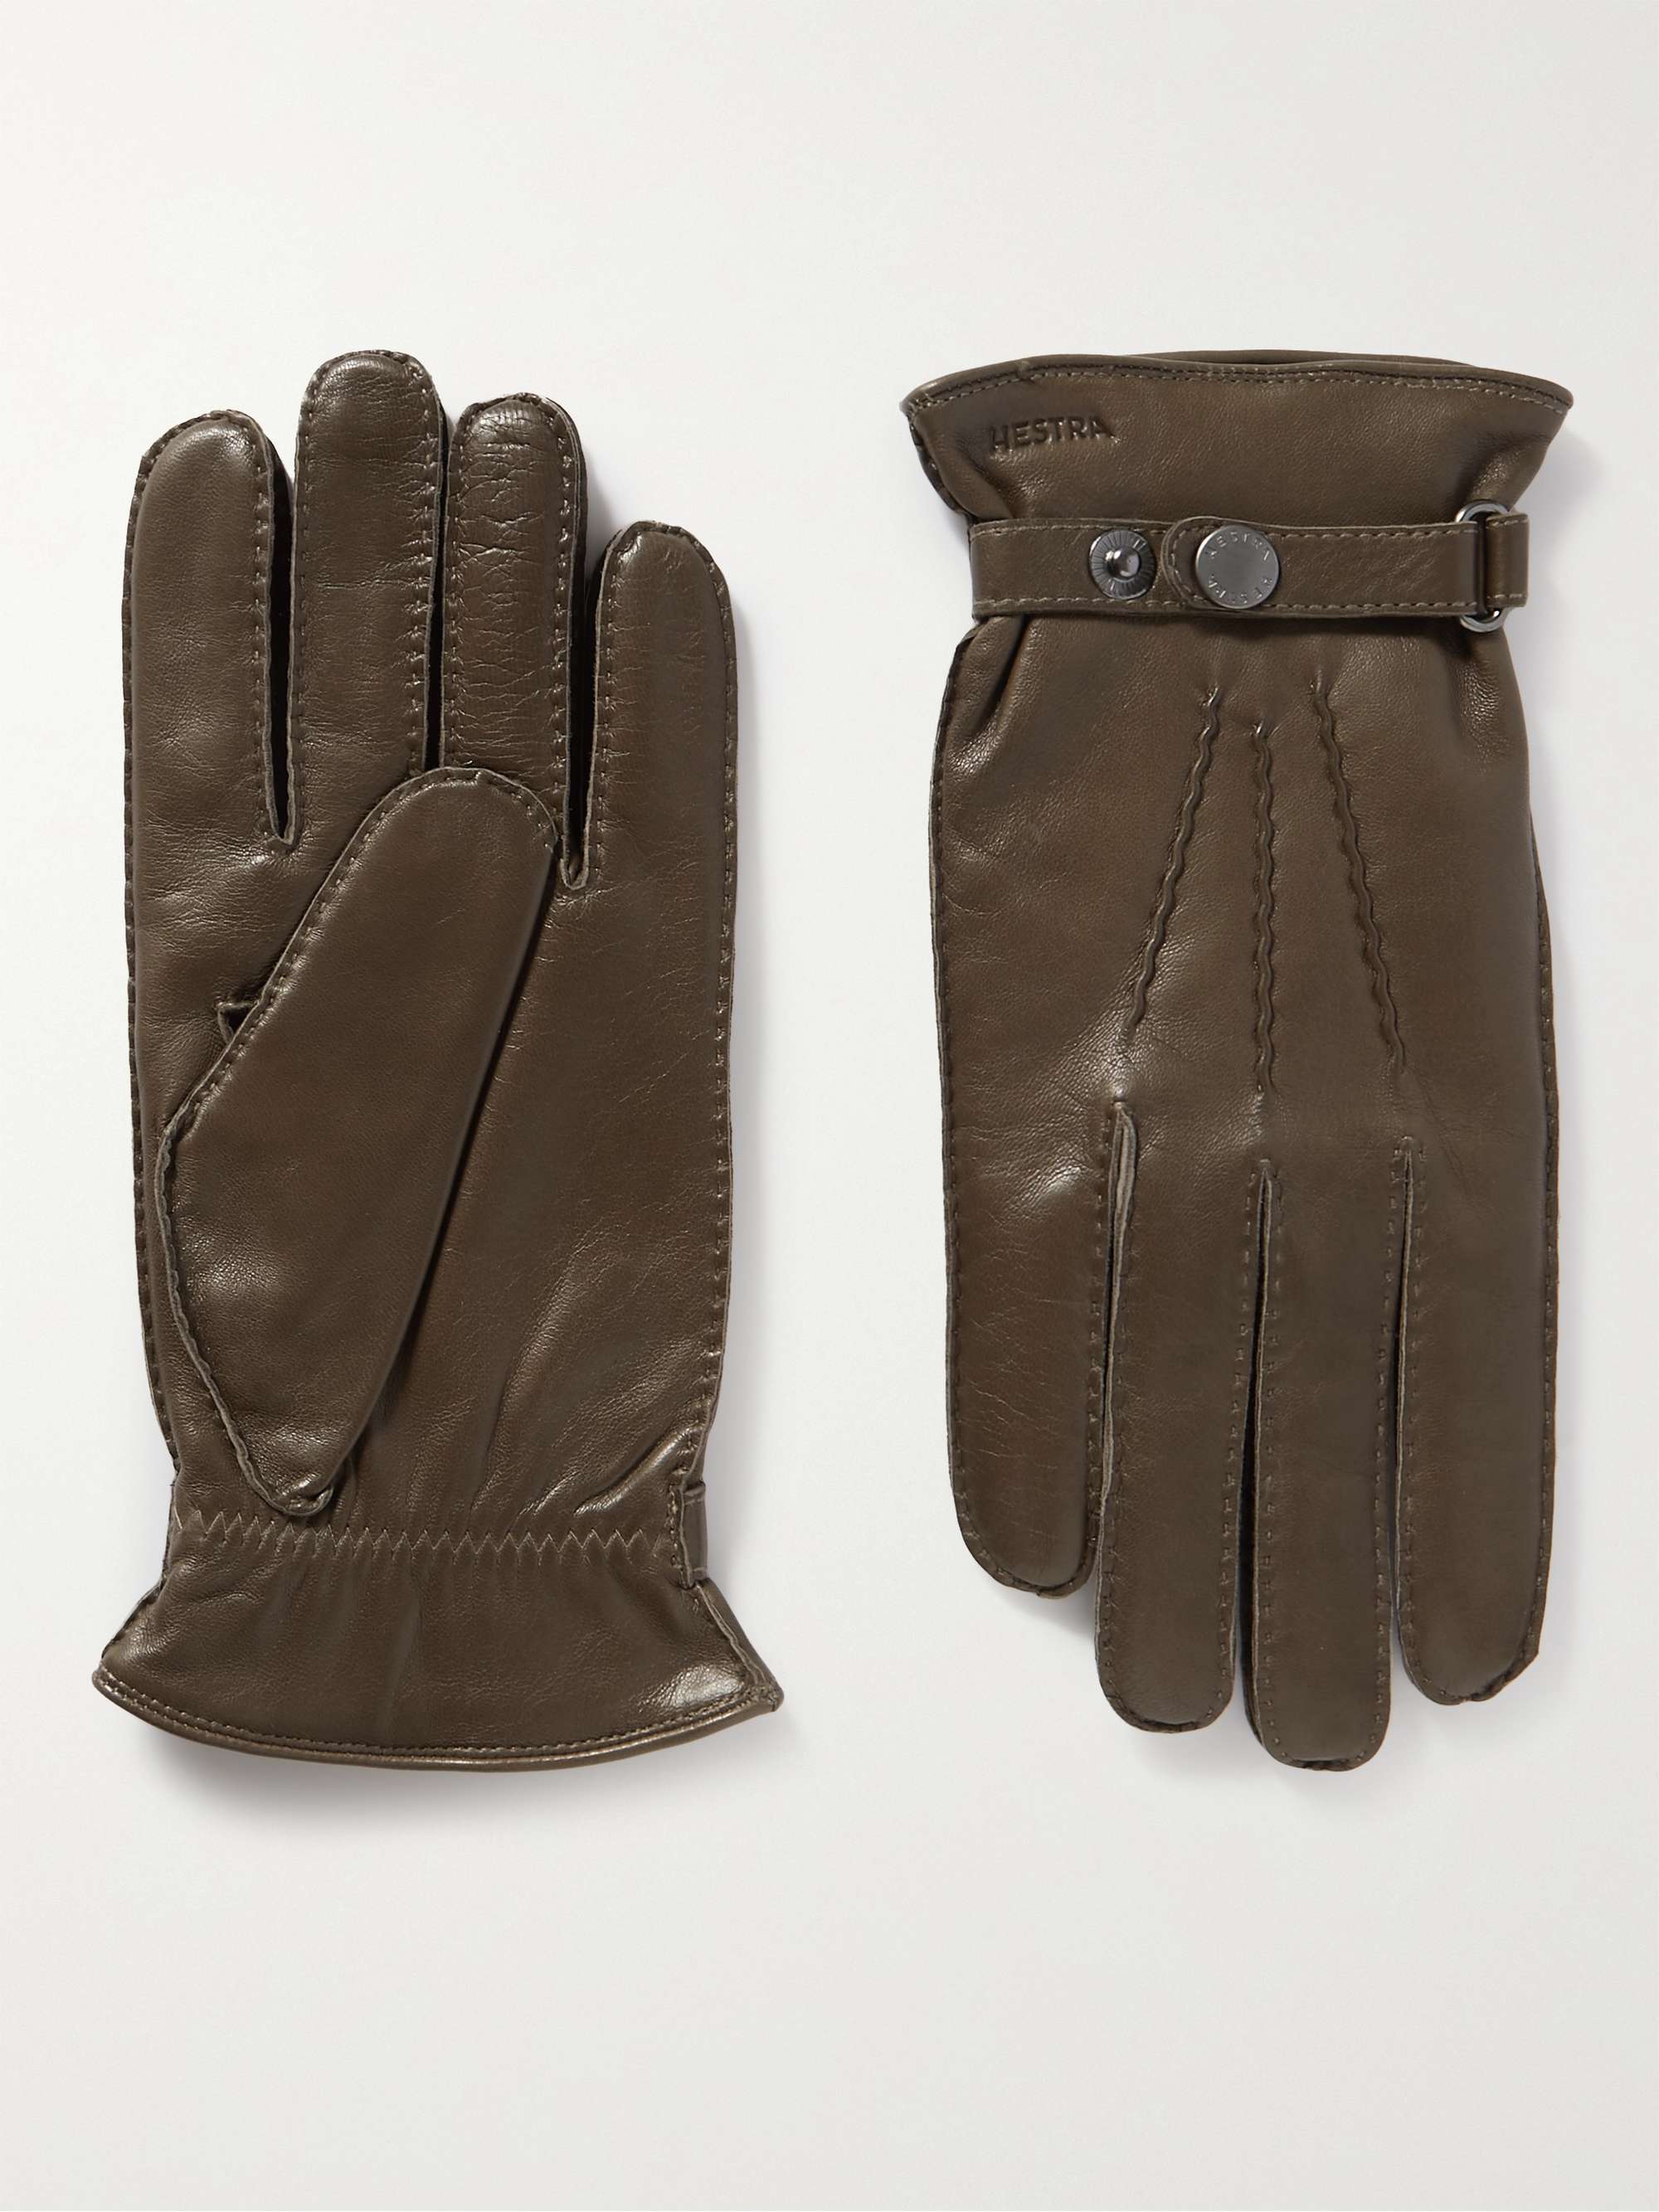 HESTRA Jake Wool-Lined Leather Gloves